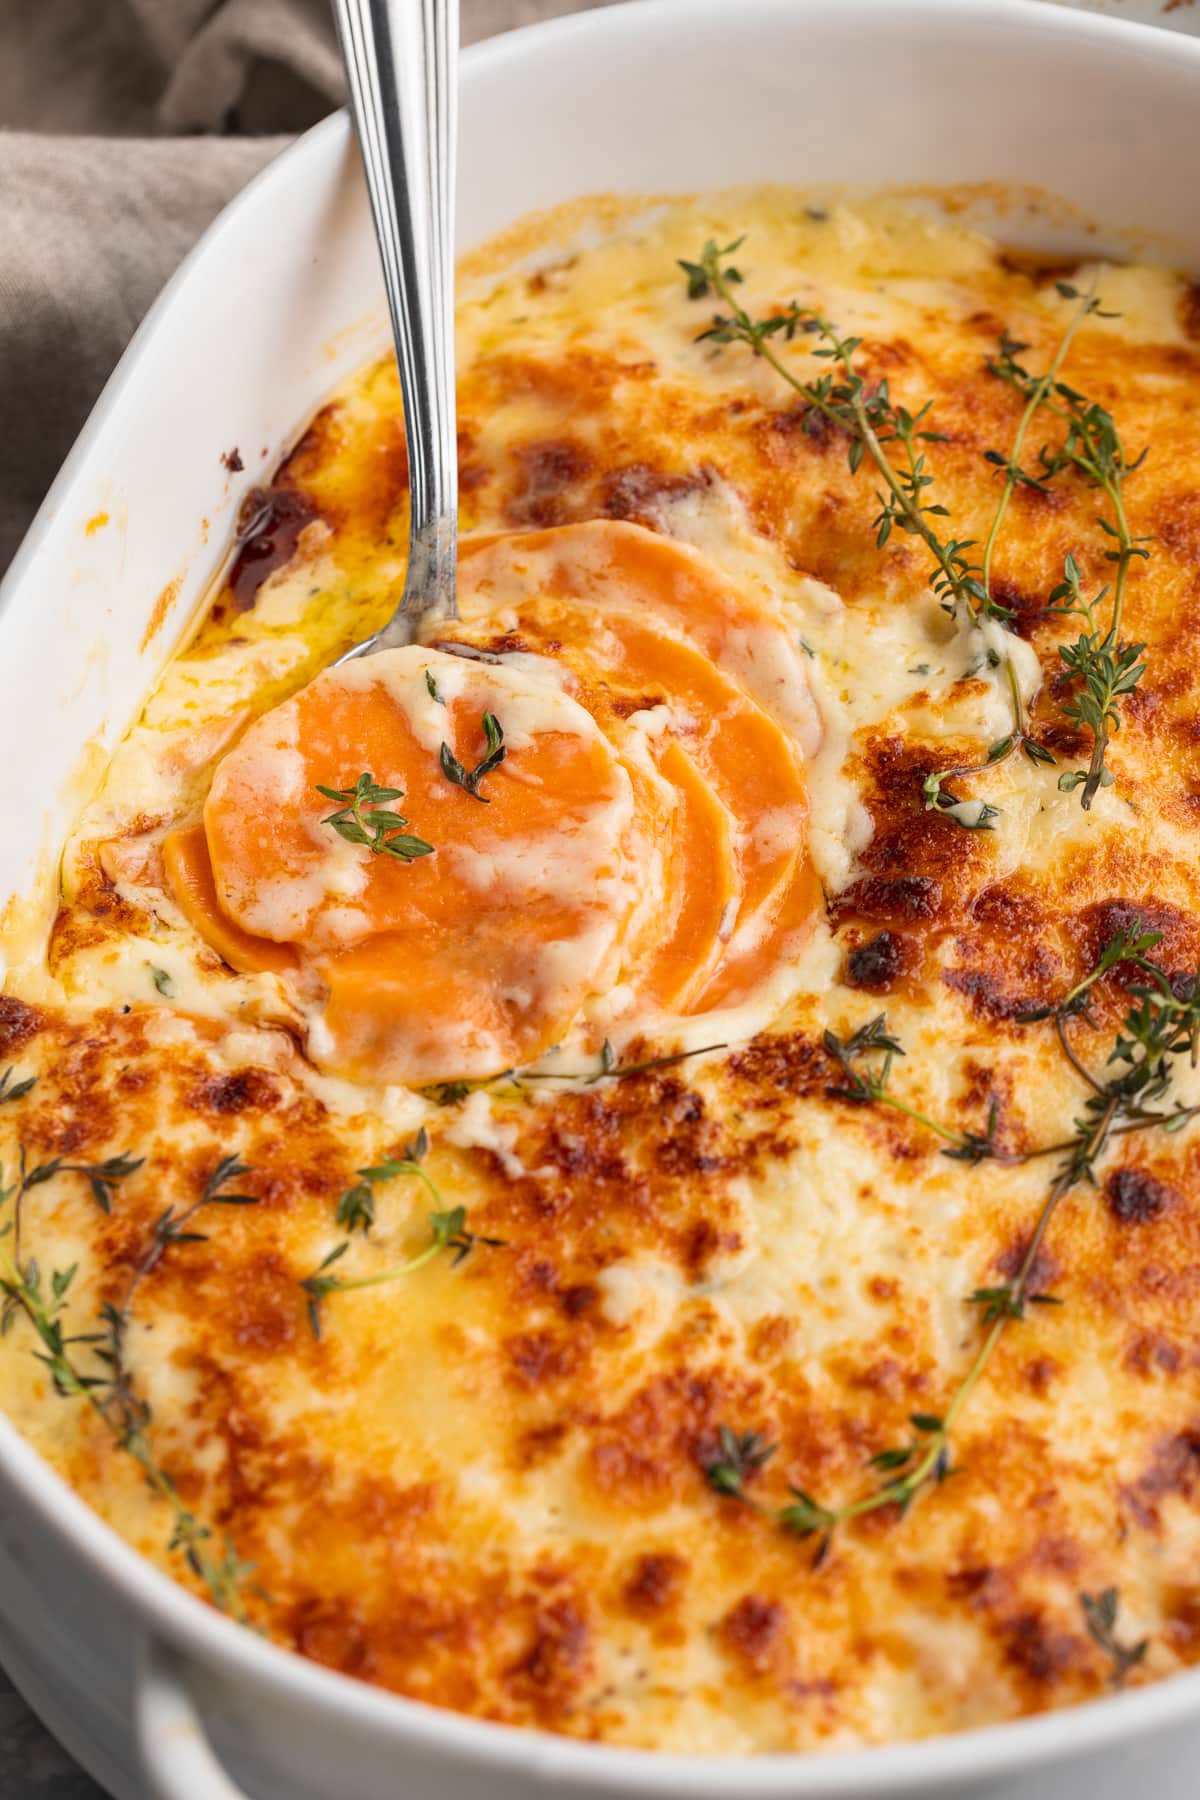 A casserole dish of creamy scalloped sweet potatoes with a cheesy sauce.